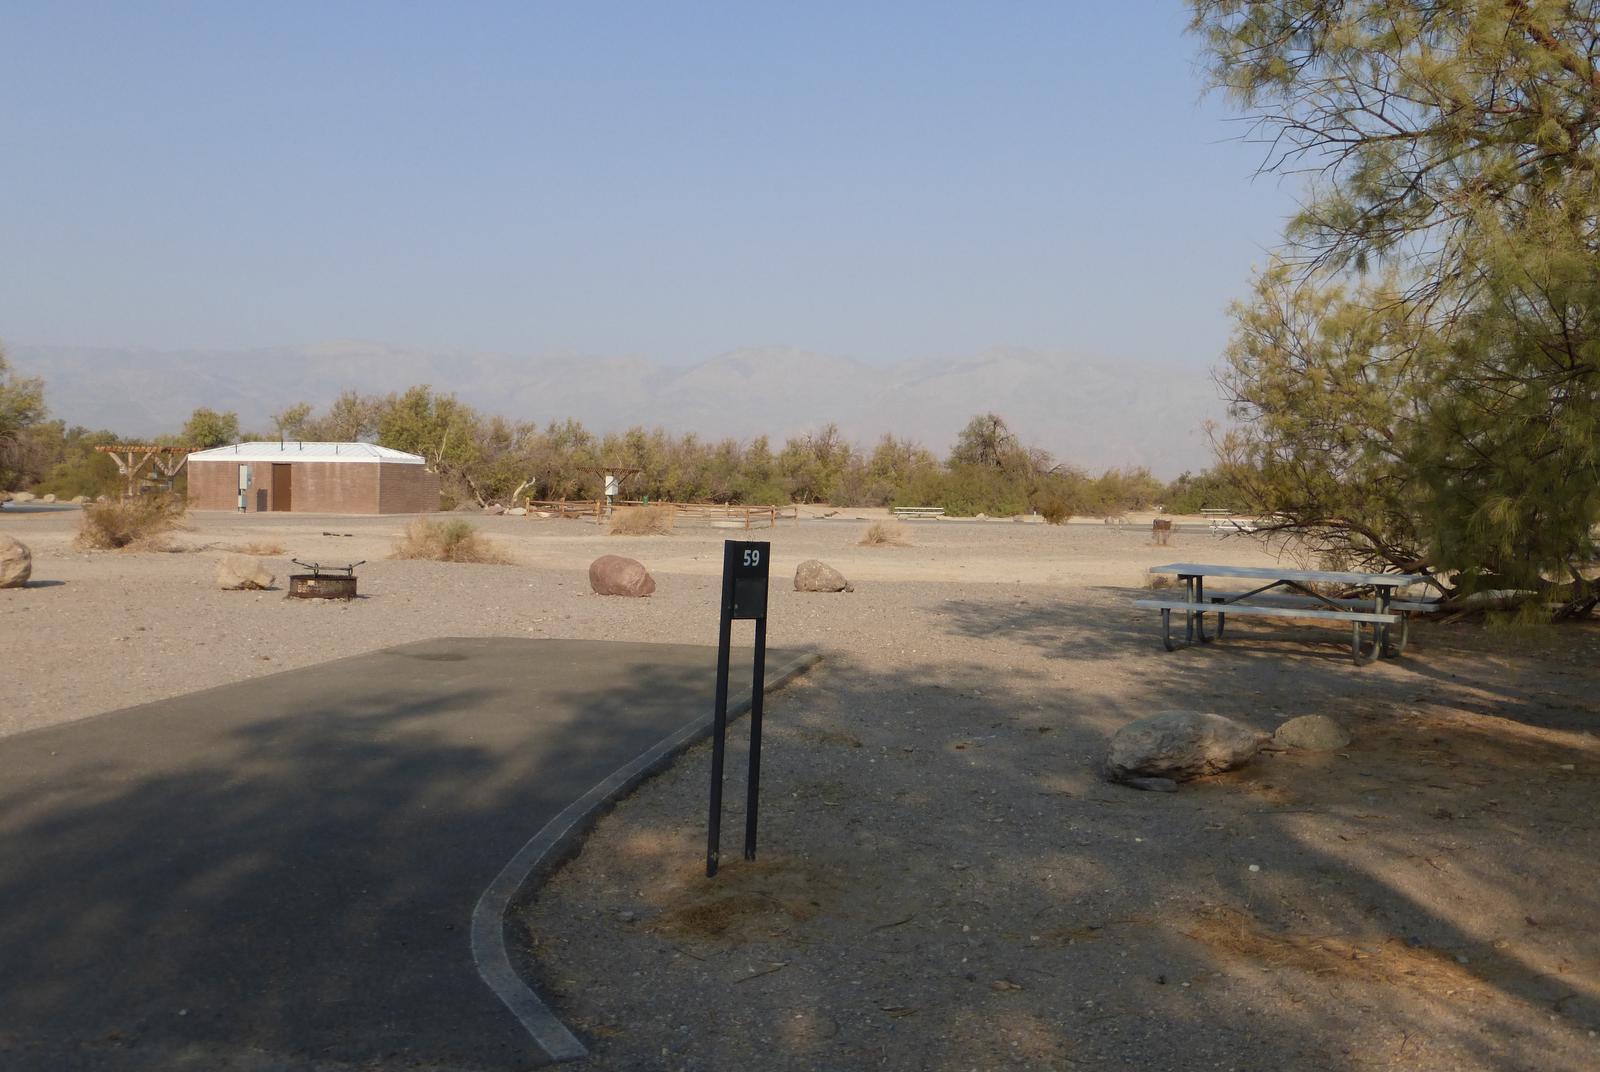 Furnace Creek Campground standard nonelectric site #59 with picnic table and fire ring.